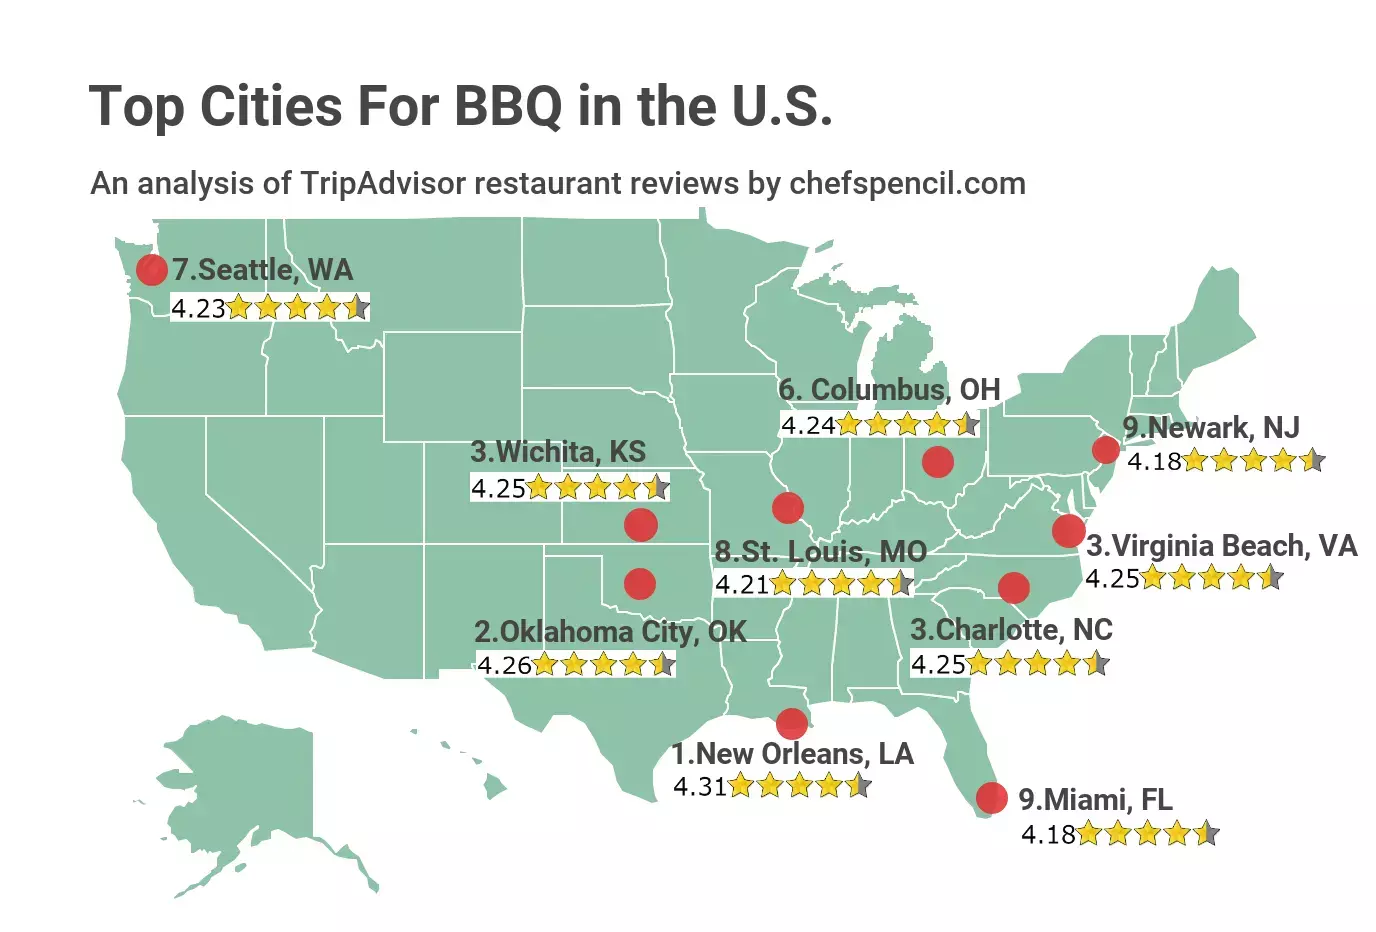 Top 10 US cities for barbecue